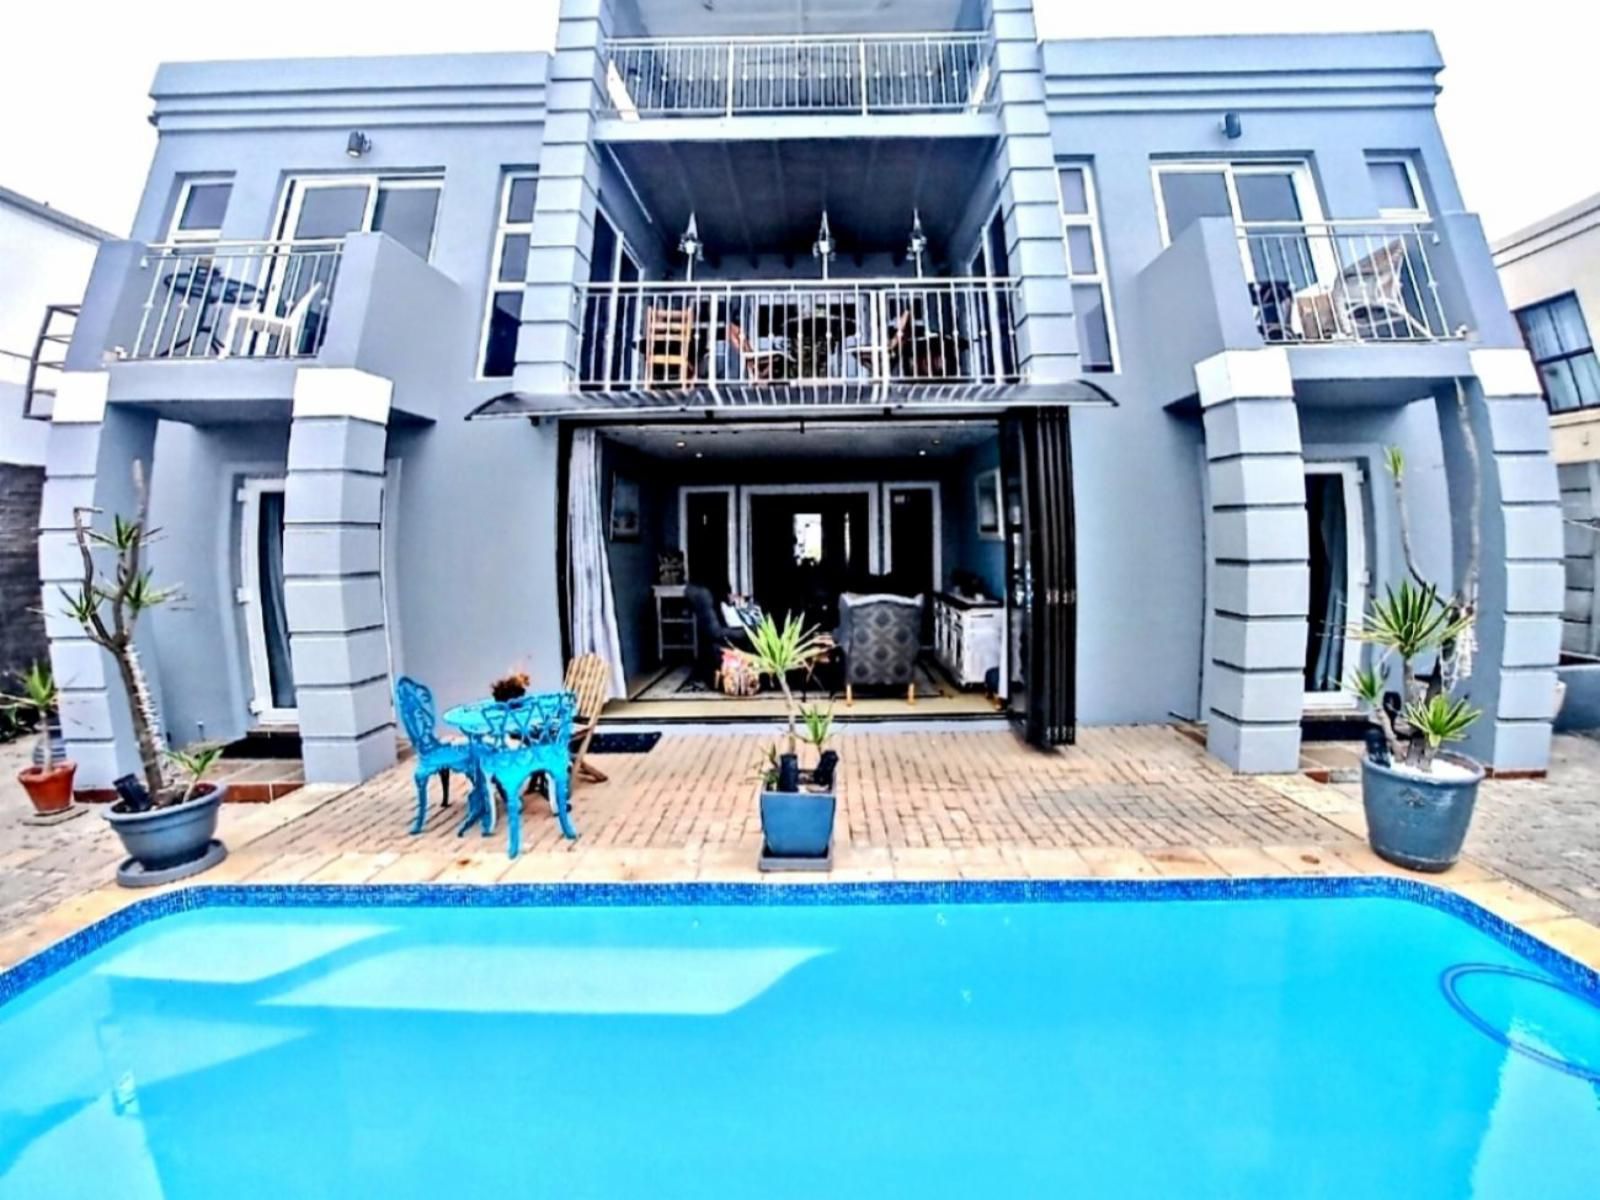 Sandcastle Bandb Melkbosstrand Cape Town Western Cape South Africa Balcony, Architecture, House, Building, Swimming Pool